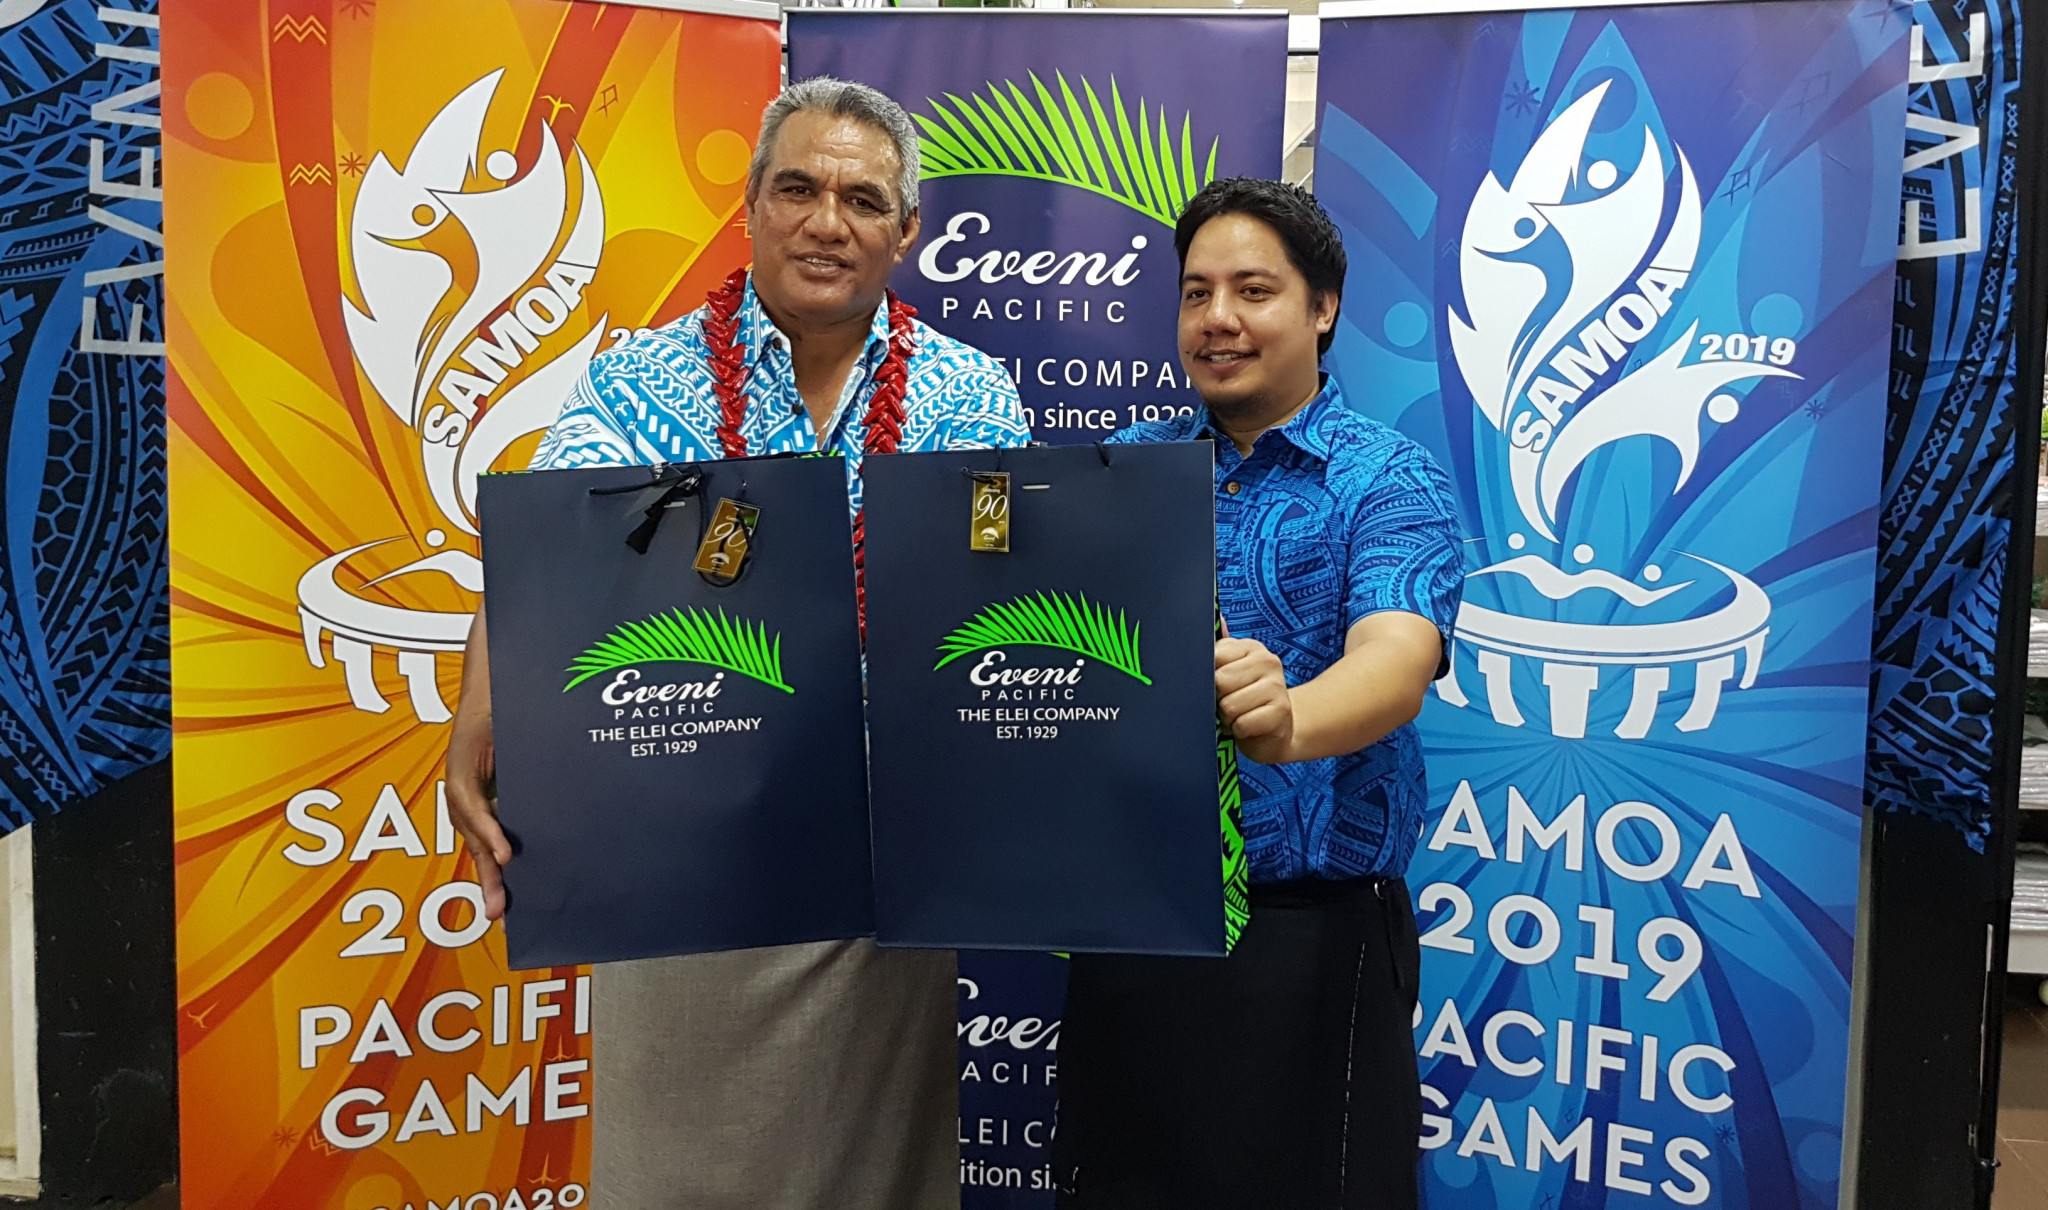 Eveni Carruthers will provide clothing for athletes and officials at the 2019 Pacific Games ©Samoa 2019